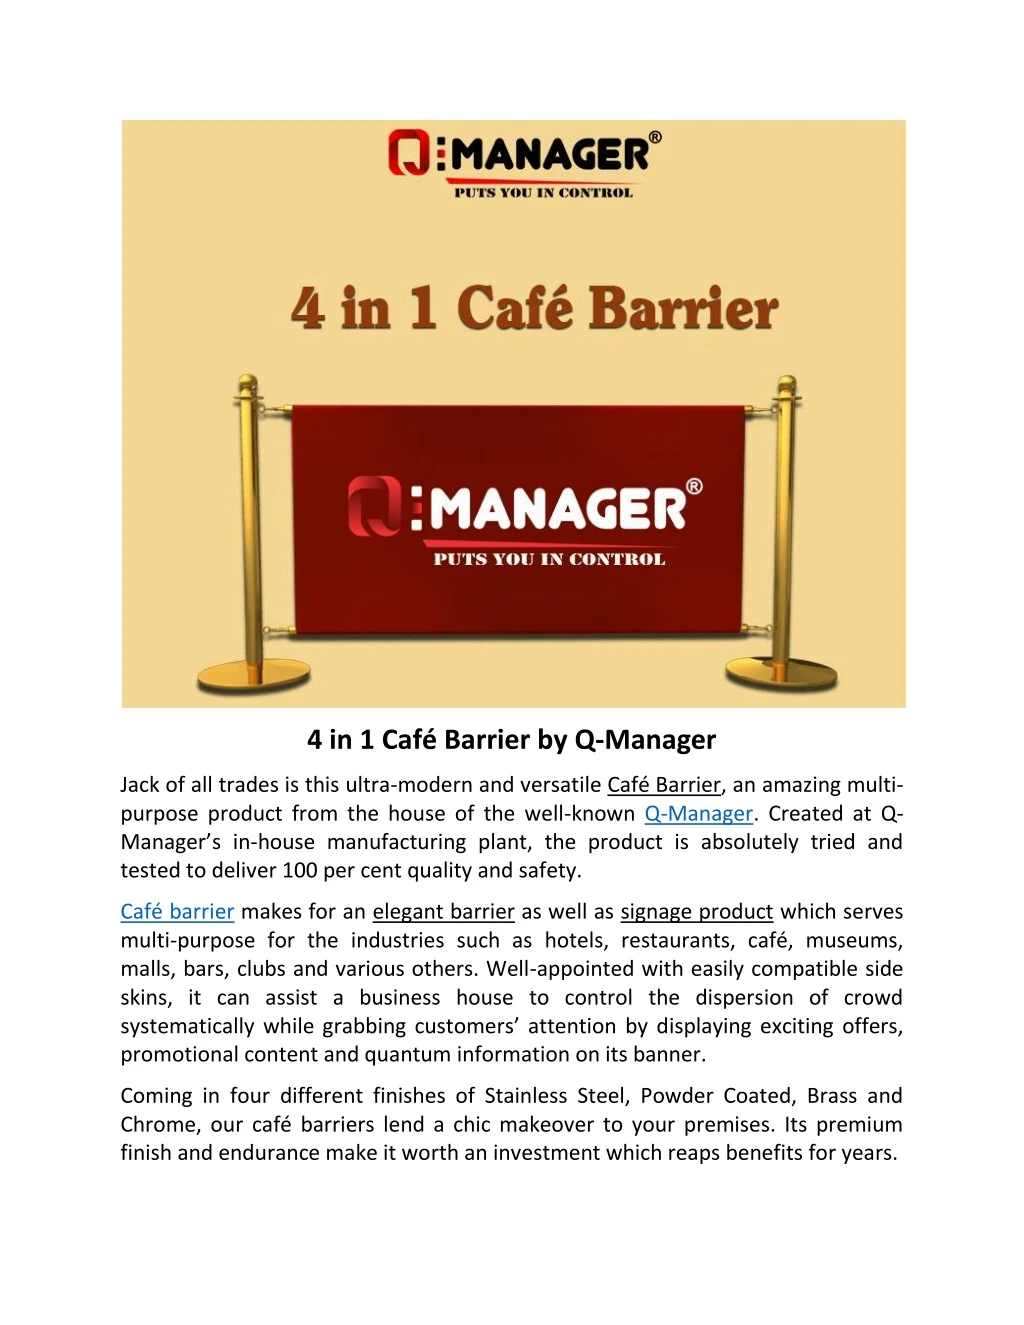 4 in 1 caf barrier by q manager